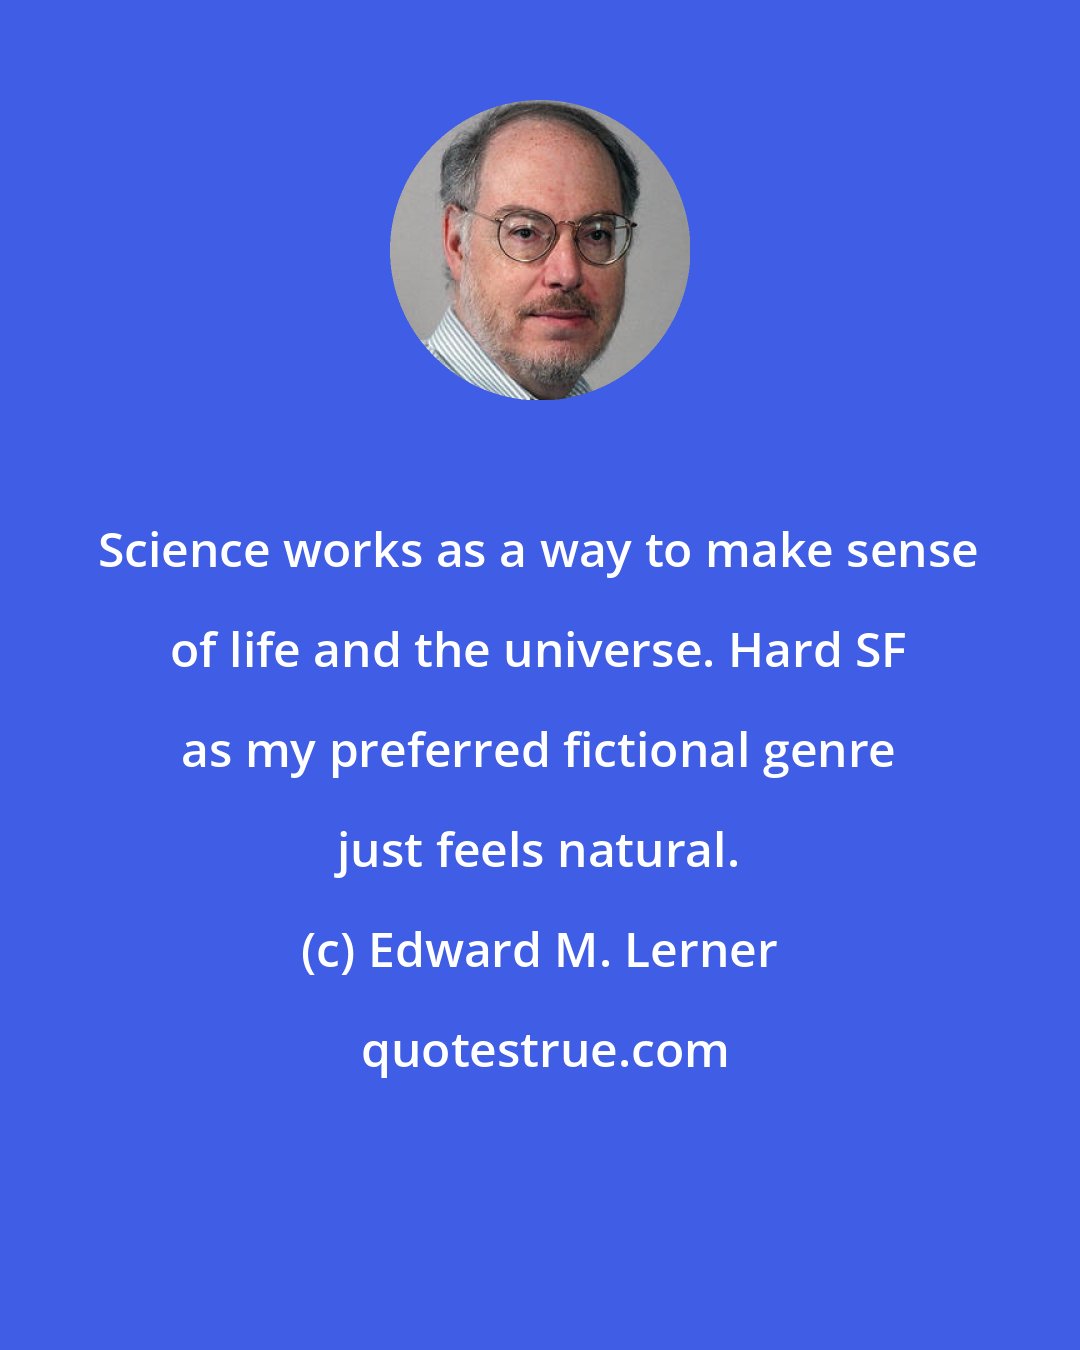 Edward M. Lerner: Science works as a way to make sense of life and the universe. Hard SF as my preferred fictional genre just feels natural.